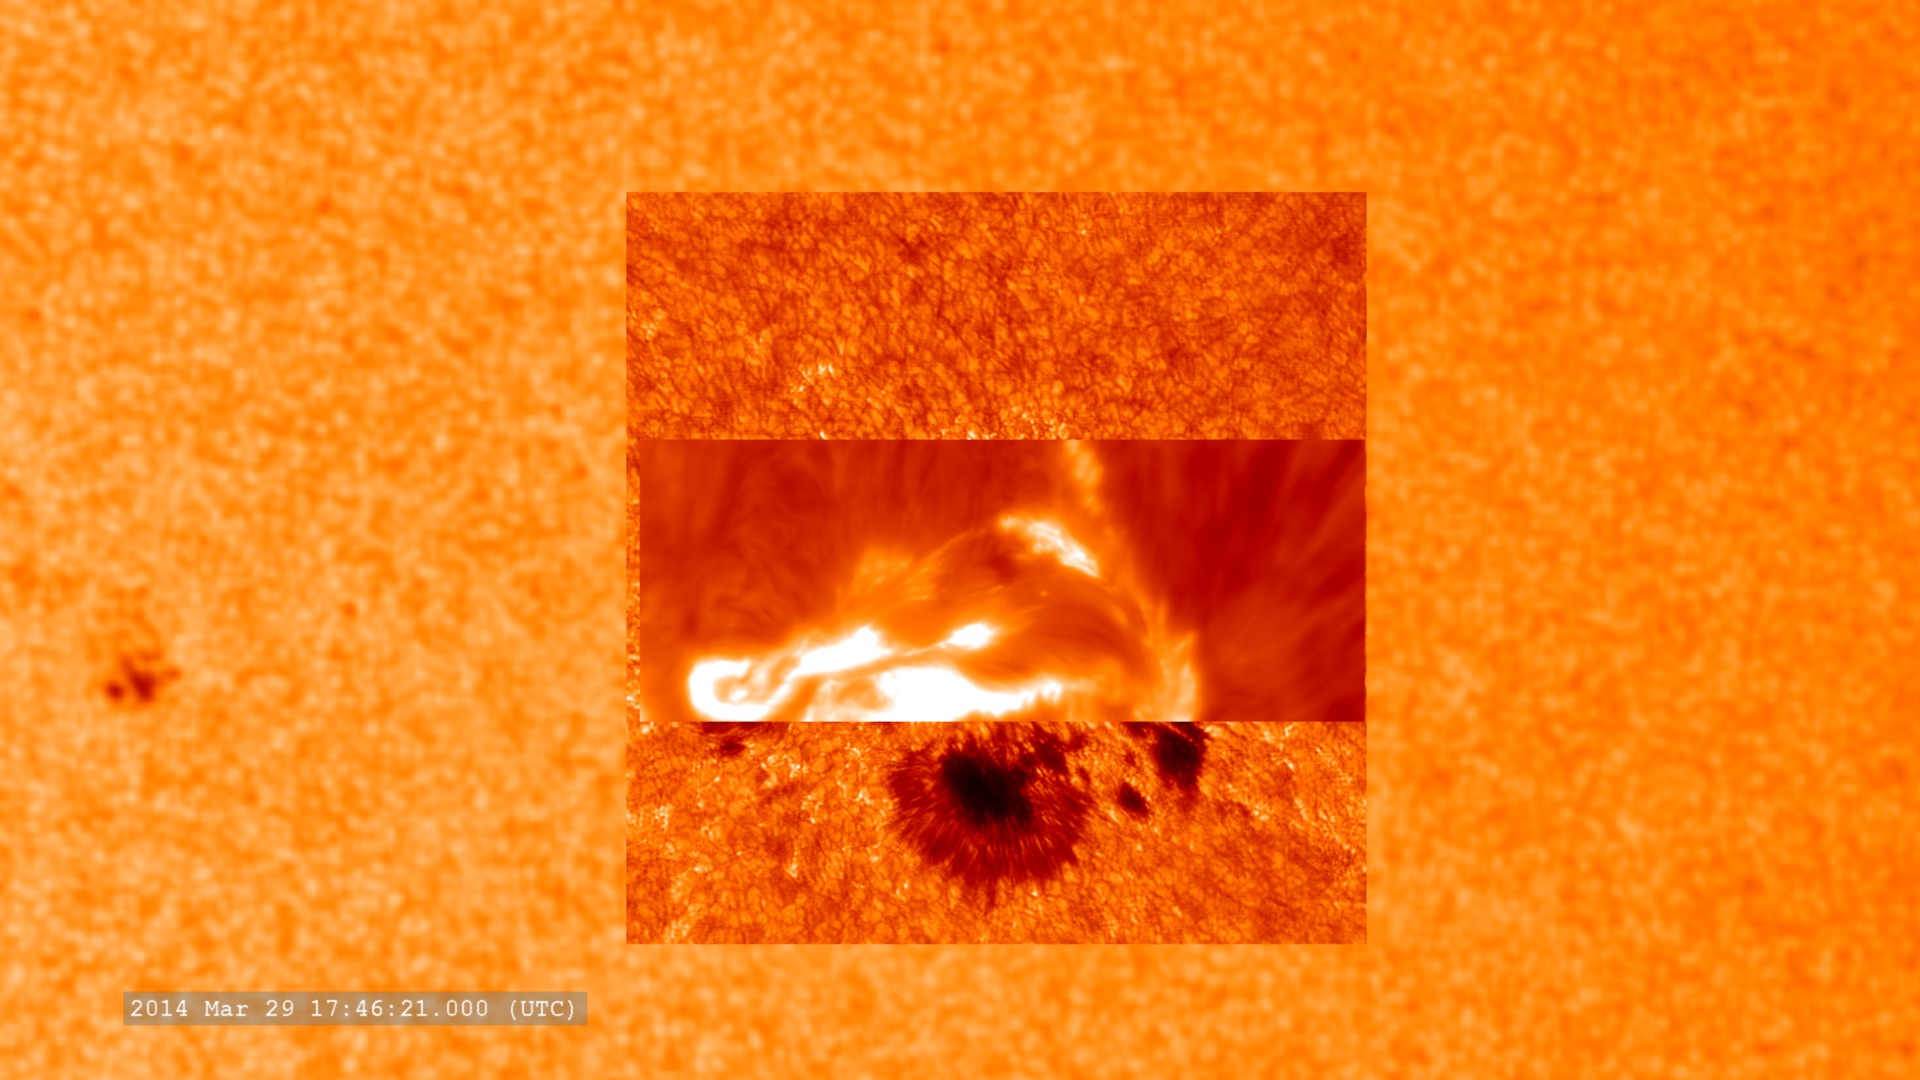 A view of the visible light solar disk from SDO/HMI and zoom-in to show visible light, hydrogen-alpha, and a calcium line from the Sacremento Peak observatory.